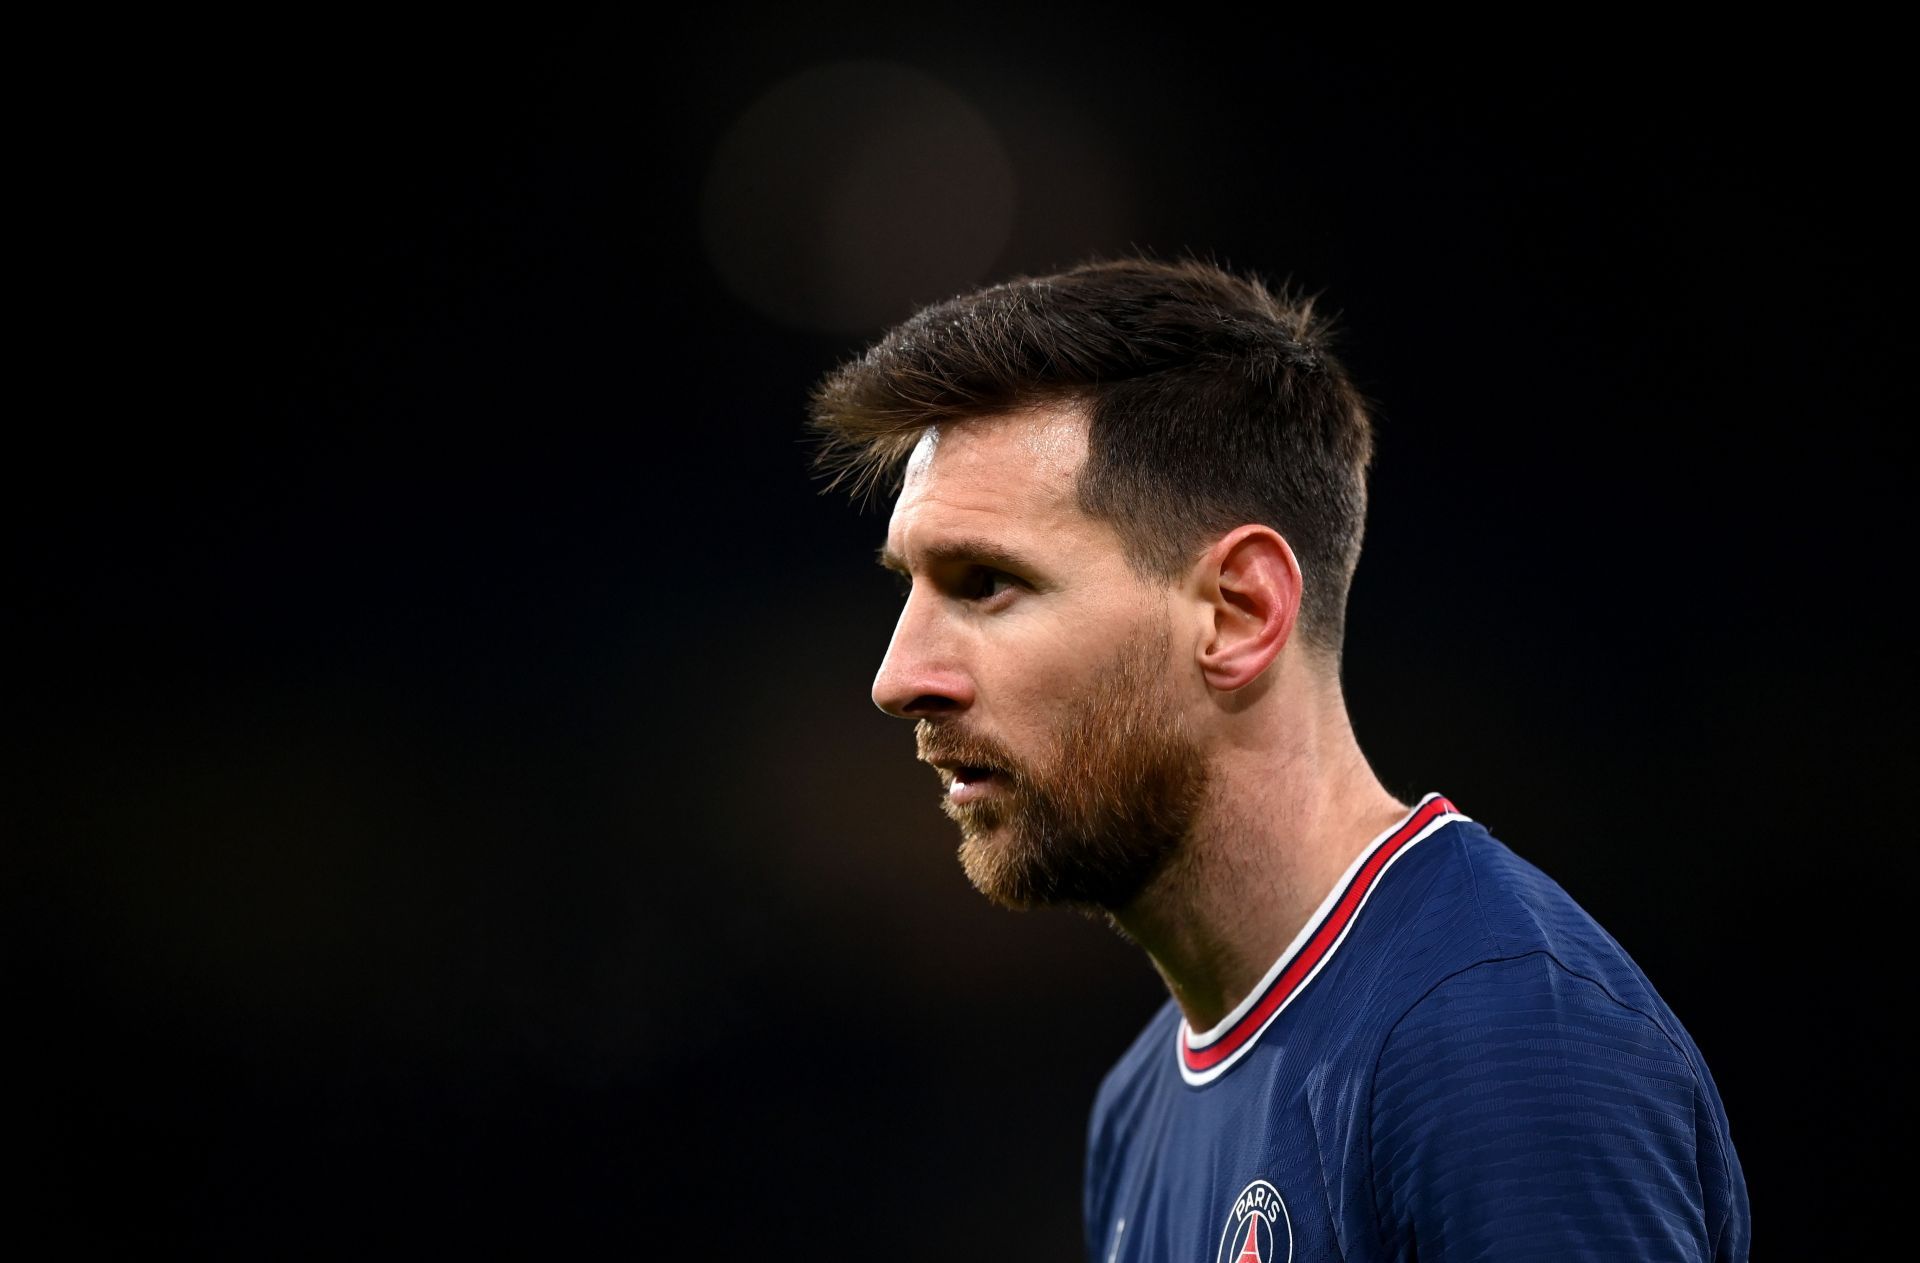 Lionel Messi needs find his feet in Ligue 1 career. (Photo by Shaun Botterill/Getty Images)